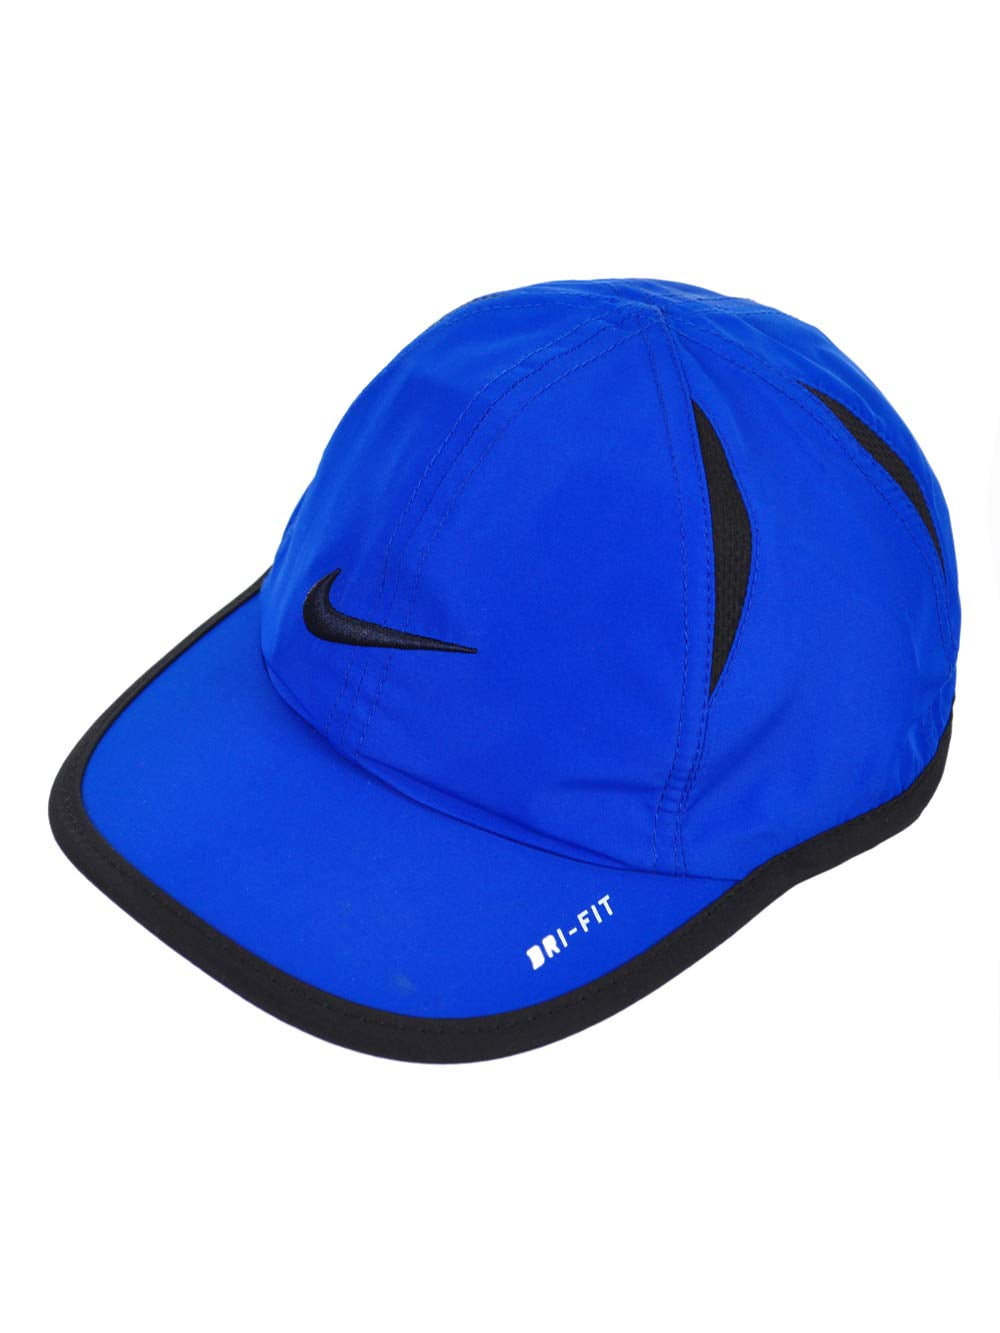 NIKE FEATHERLIGHT CAP - YOUTH 739376-100 – BB Branded